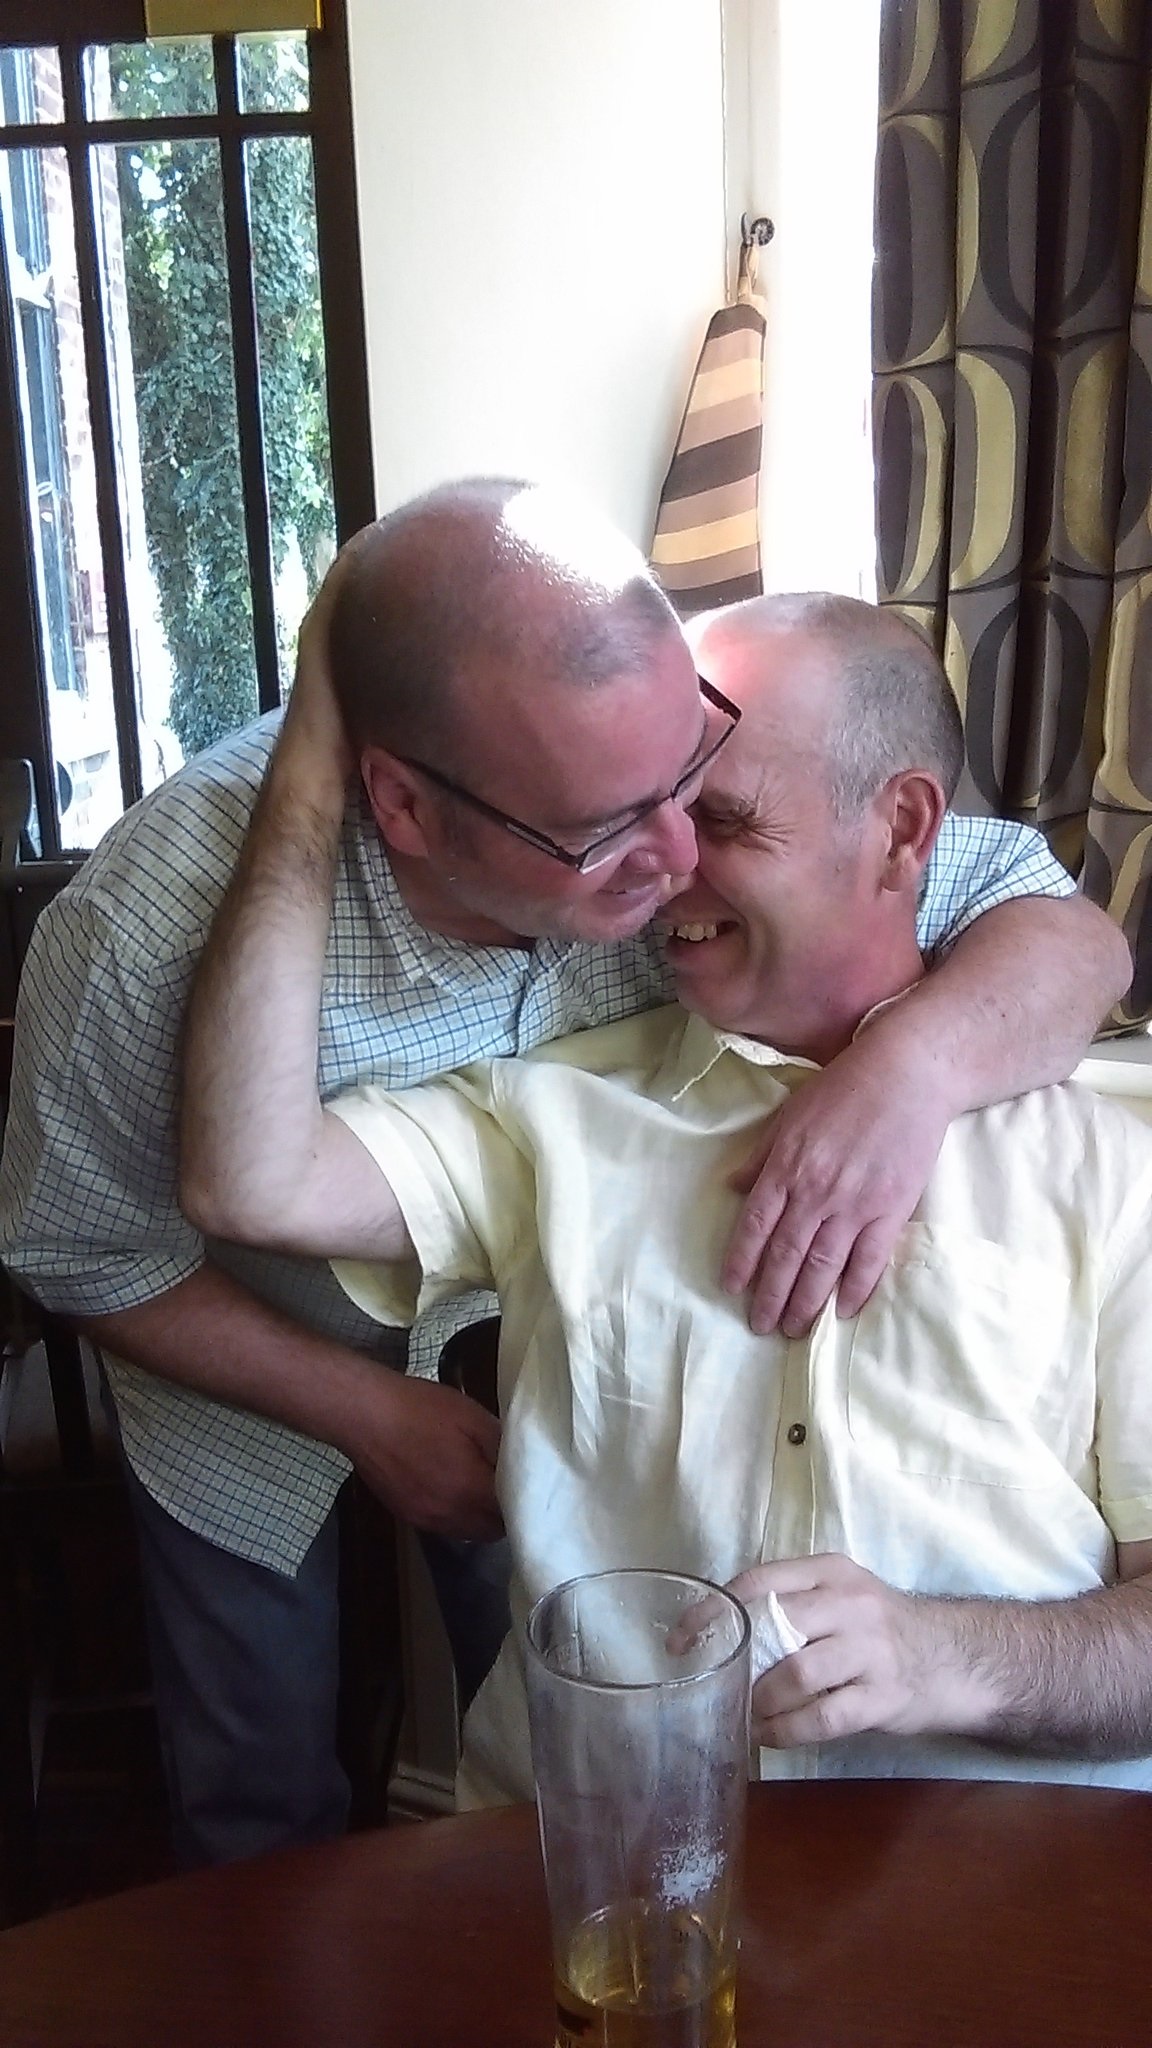 James O'Rourke (left) with his brother Tony, who has a moderate to severe learning disability